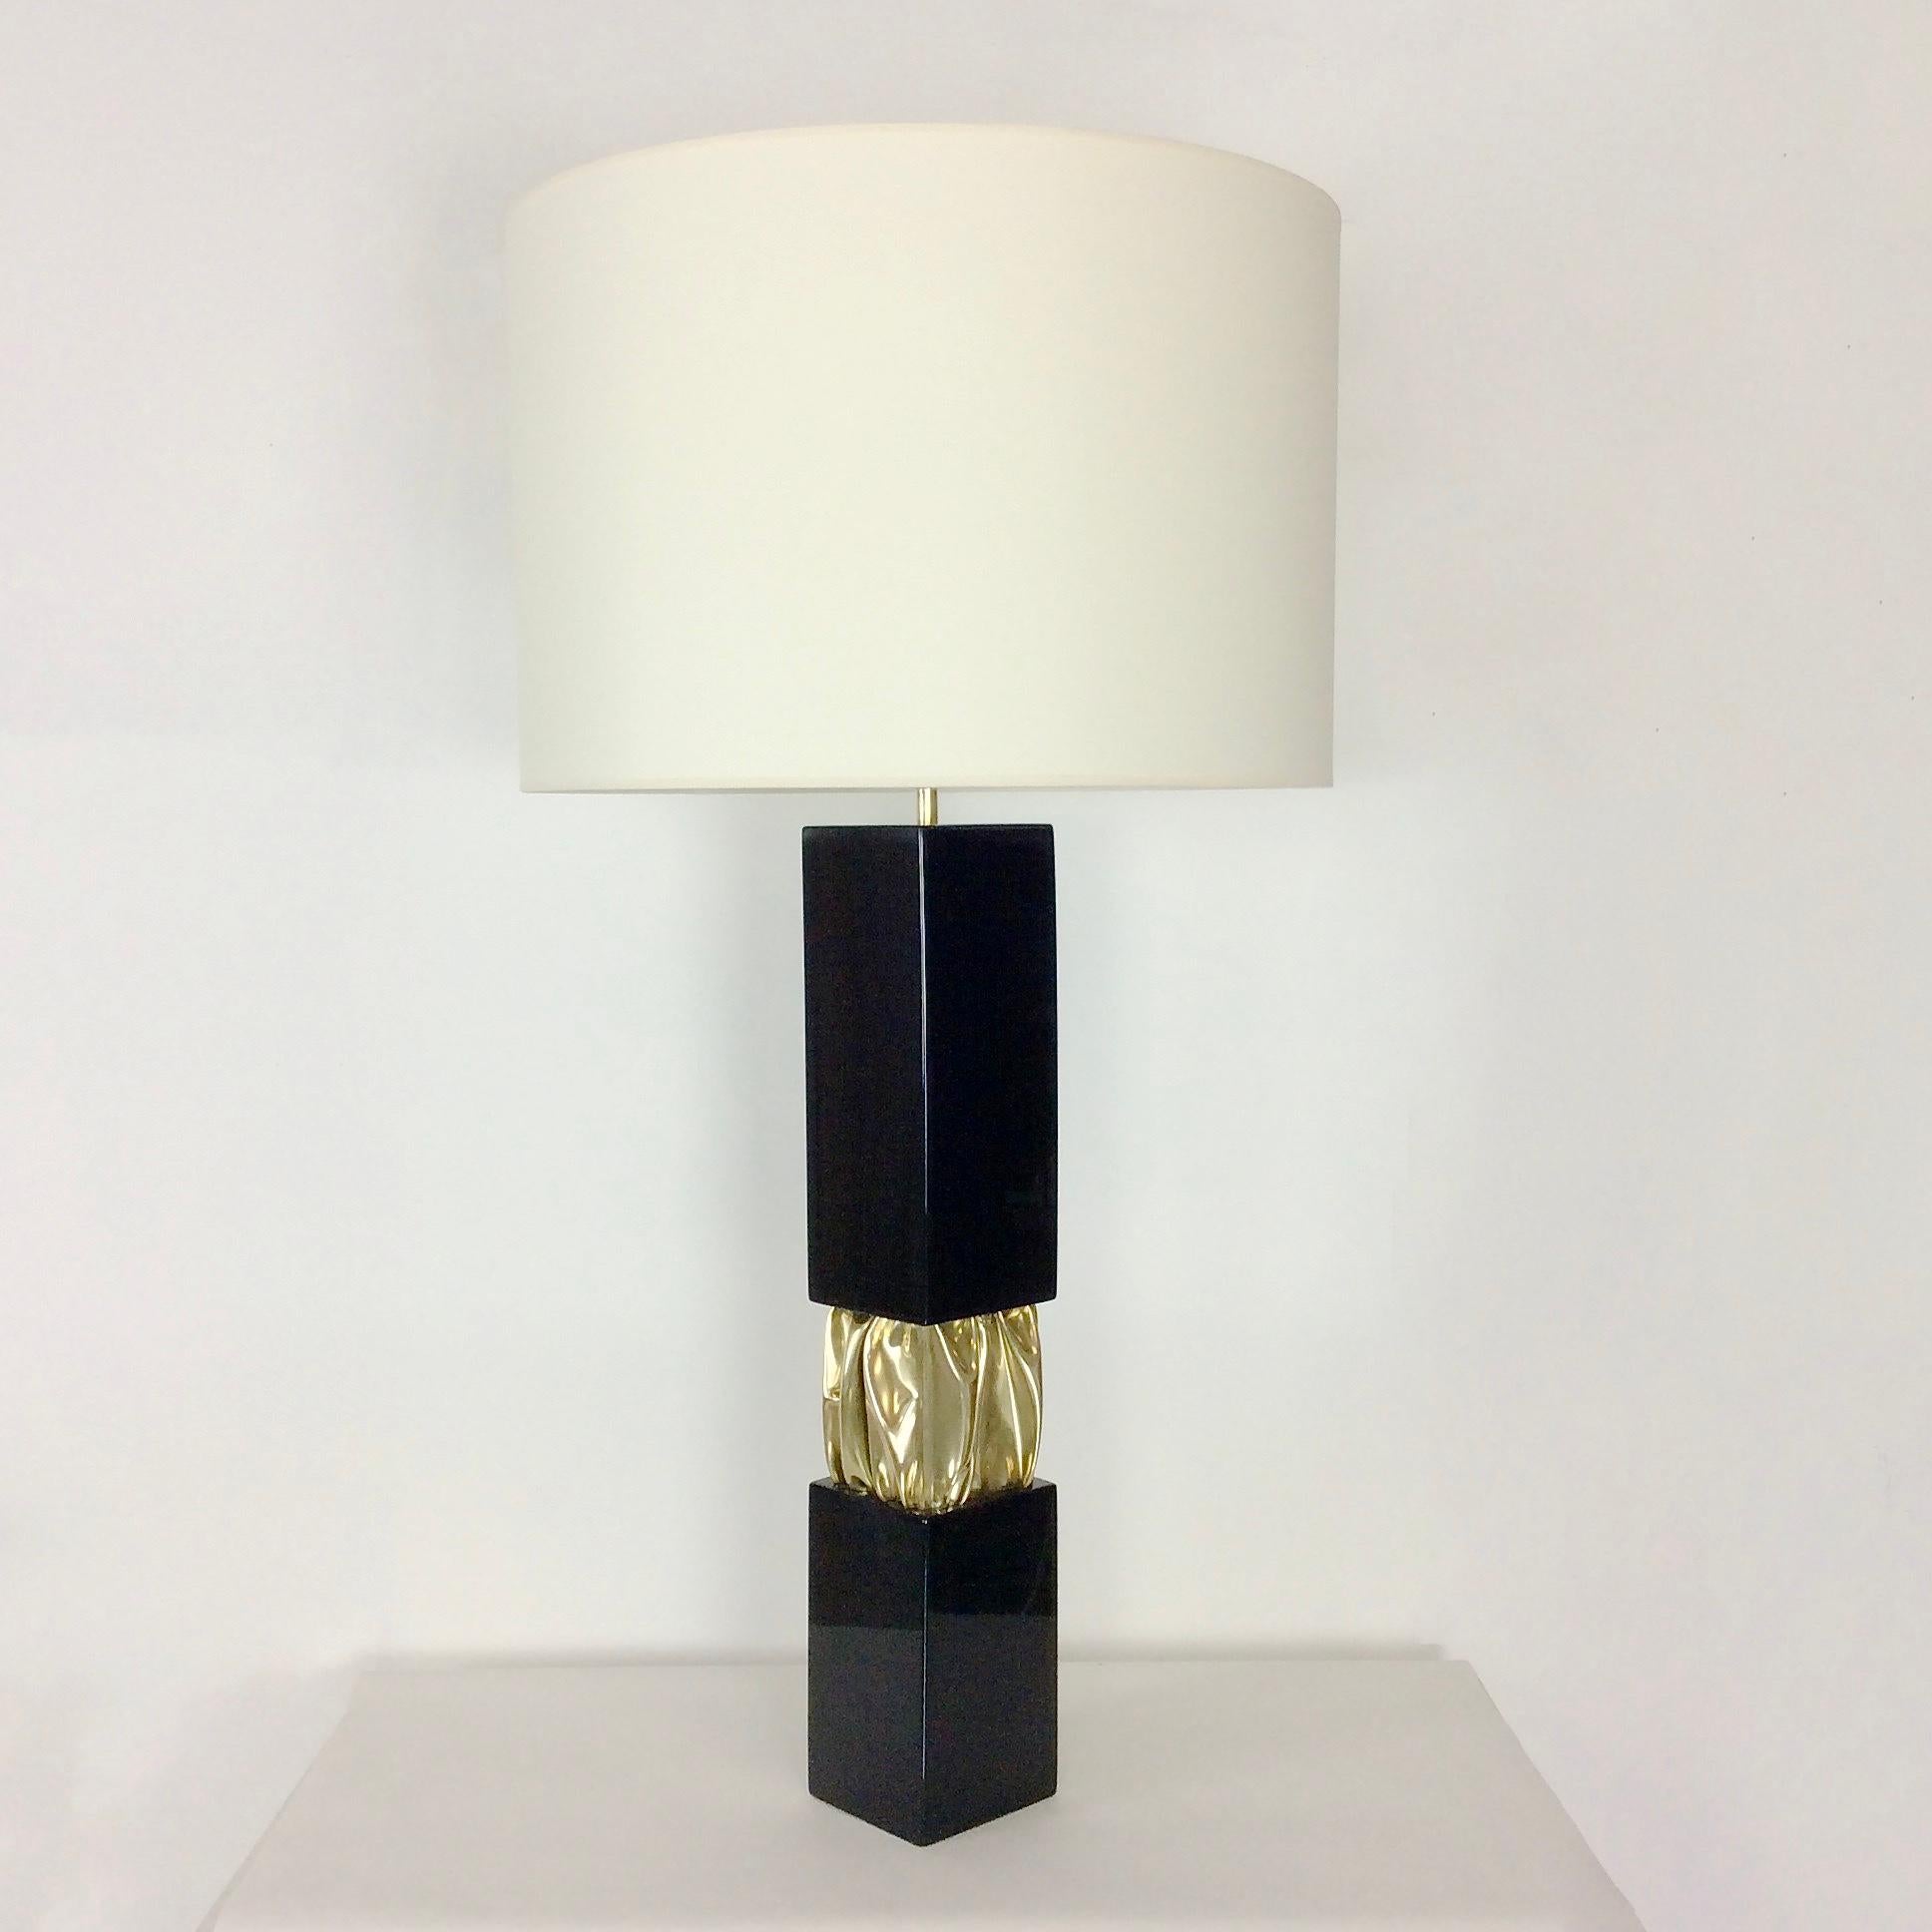 Rare large Jacques Moniquet table lamp, Cheret Edition, circa 1975, France.
Brass, black lacquered wood, off-white new fabric shade.
One E27 bulb.
Dimensions: 97 cm total height with shade, diameter of the shade: 50 cm.
All purchases are covered by